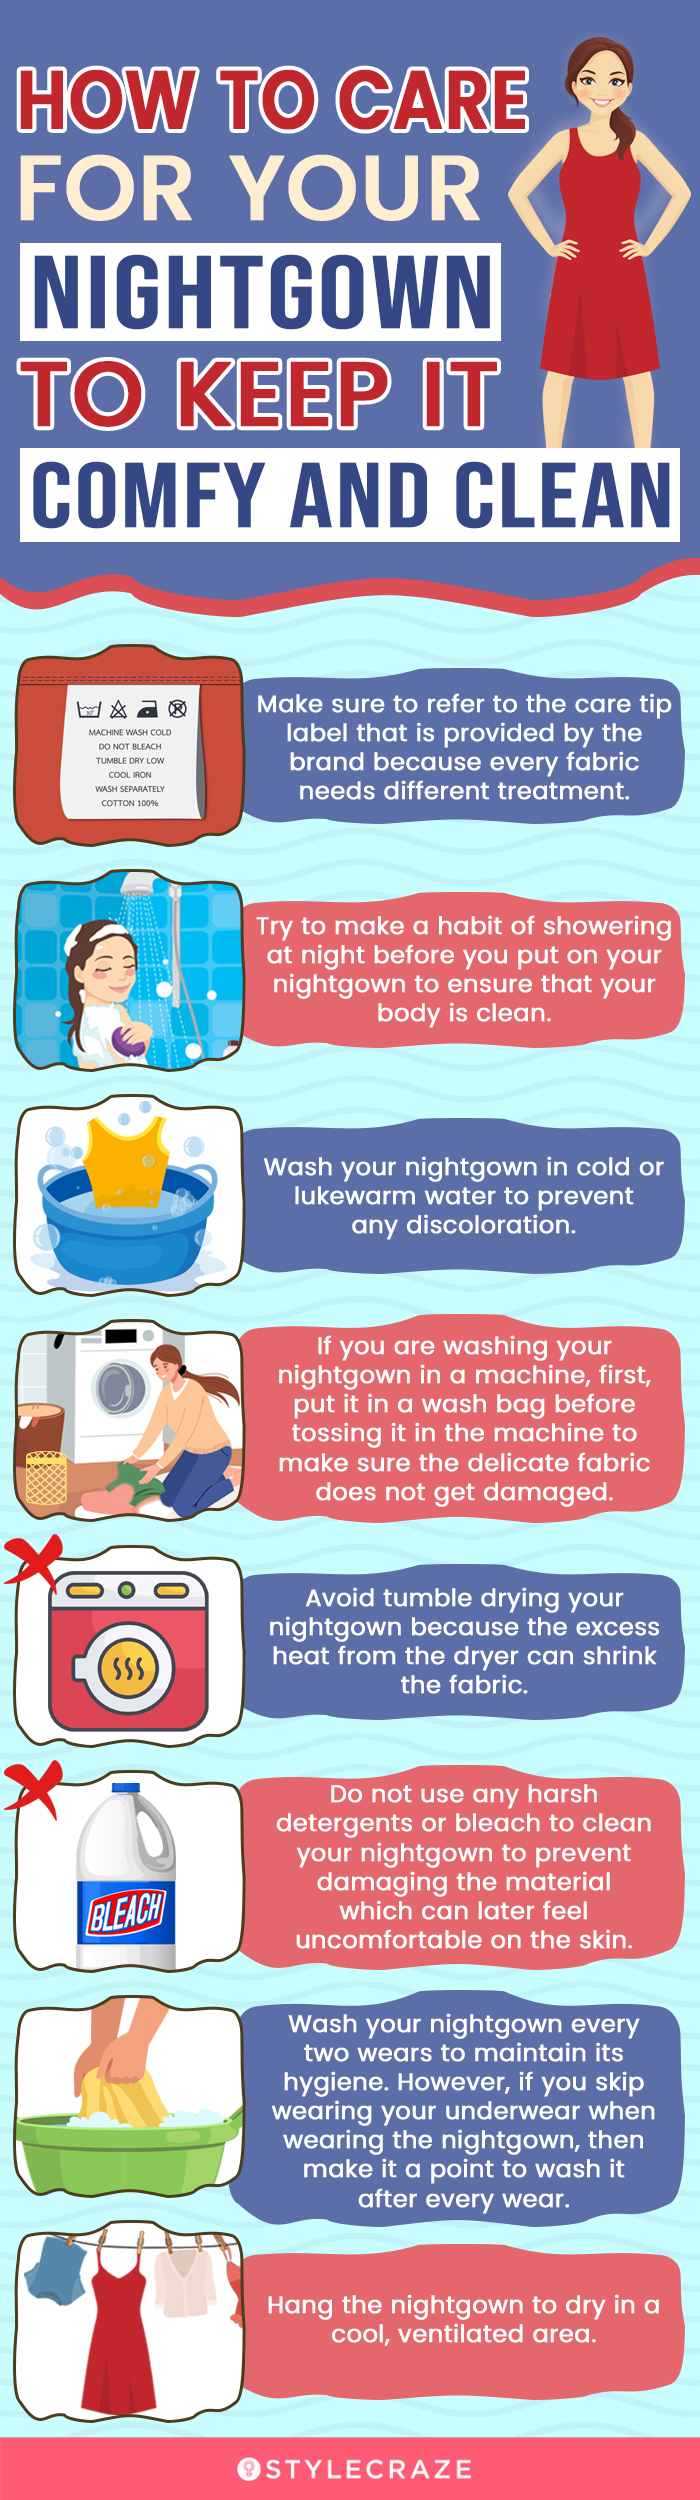 How To Care For Your Nightgown To Keep It Comfy And Clean (infographic)